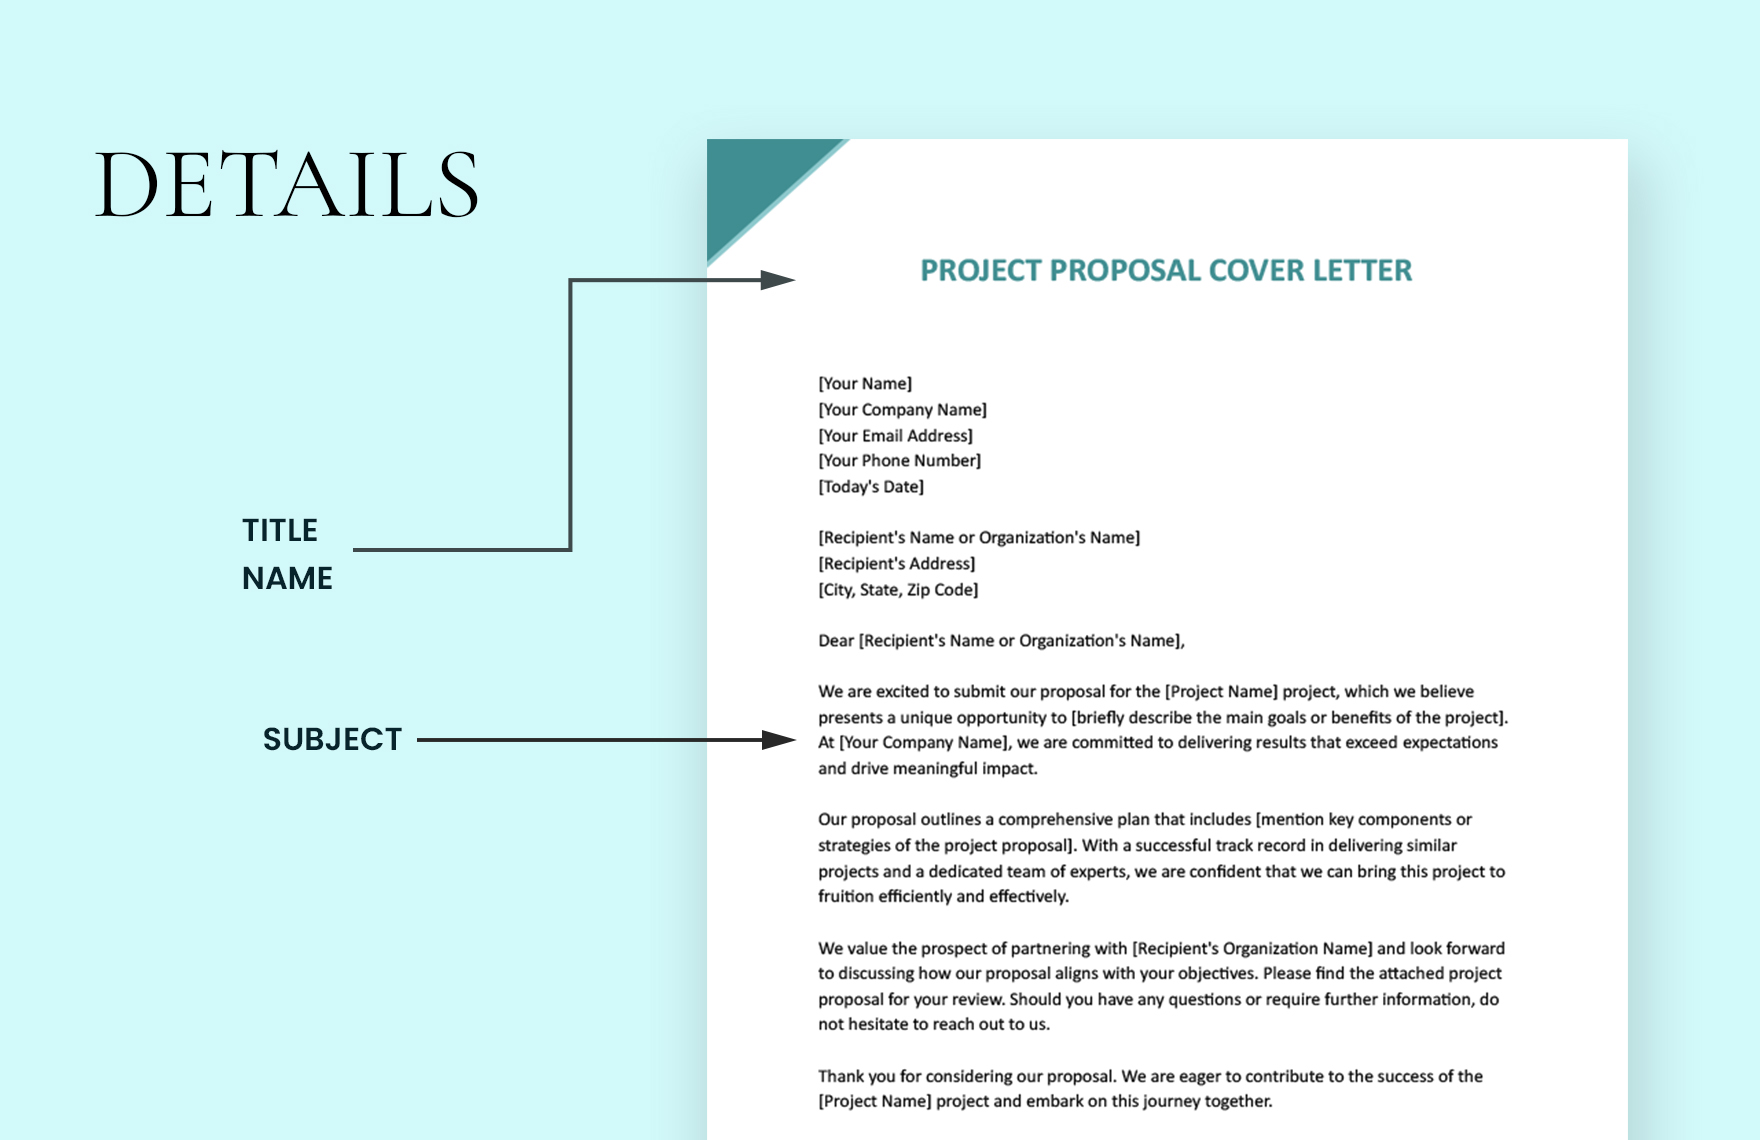 Project Proposal Cover Letter